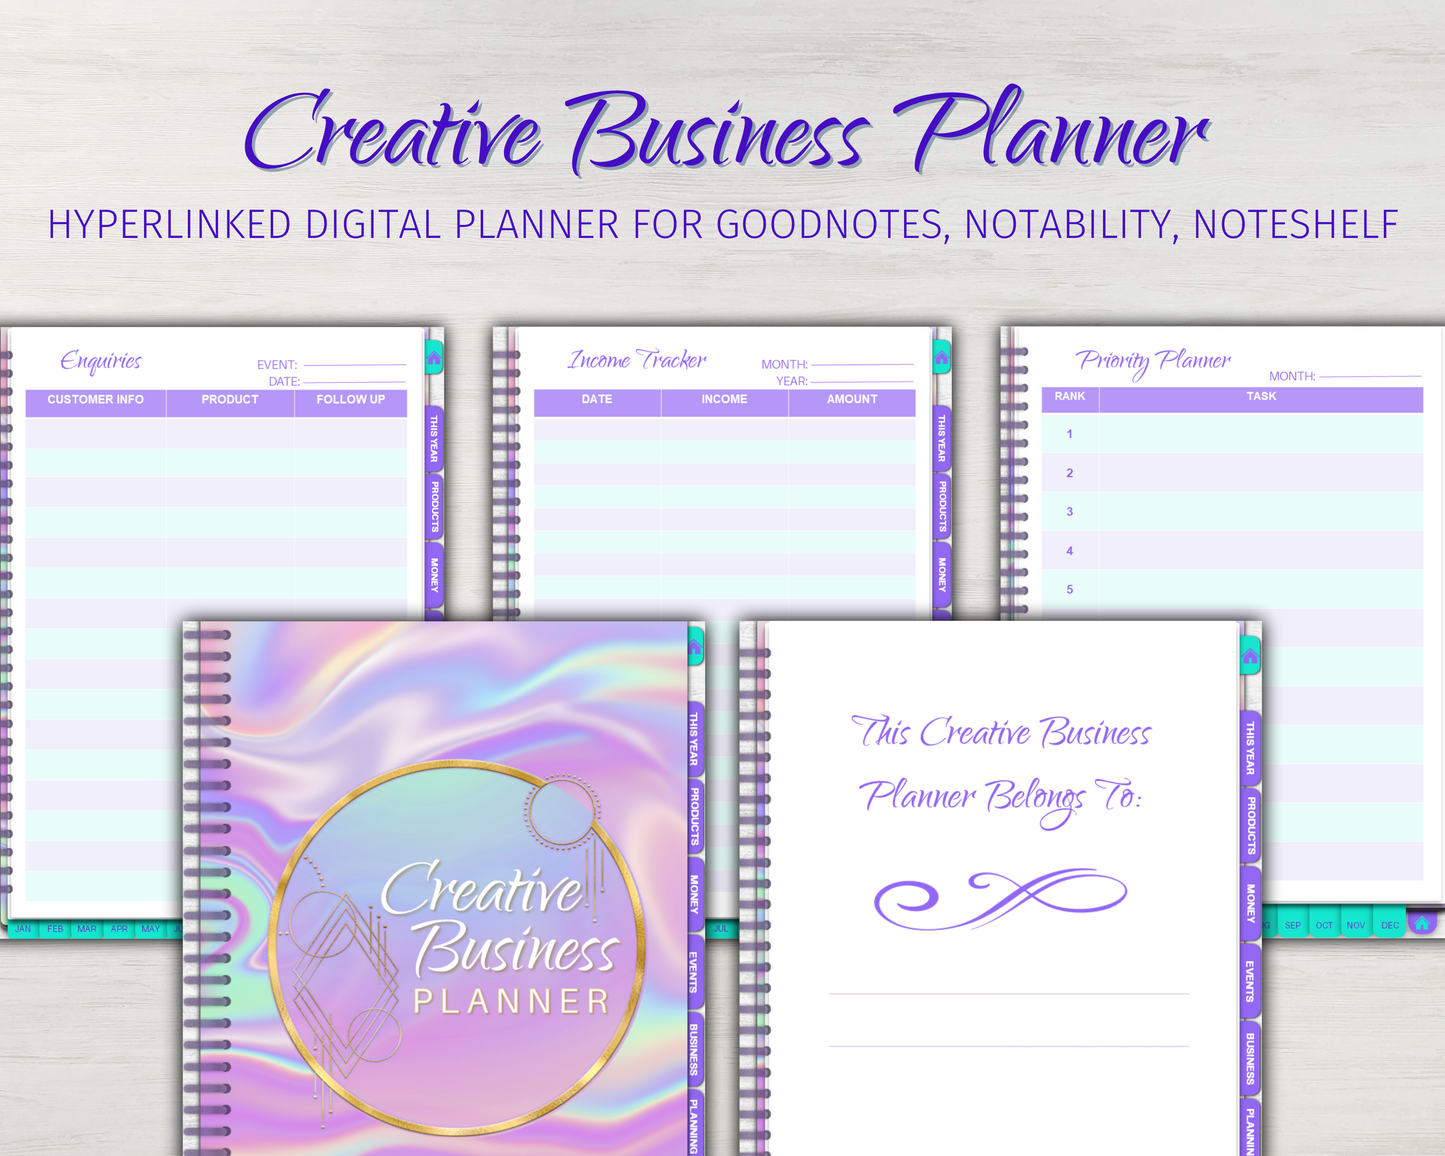 creatibe business planner hyperlinked digital planner, slection of pages